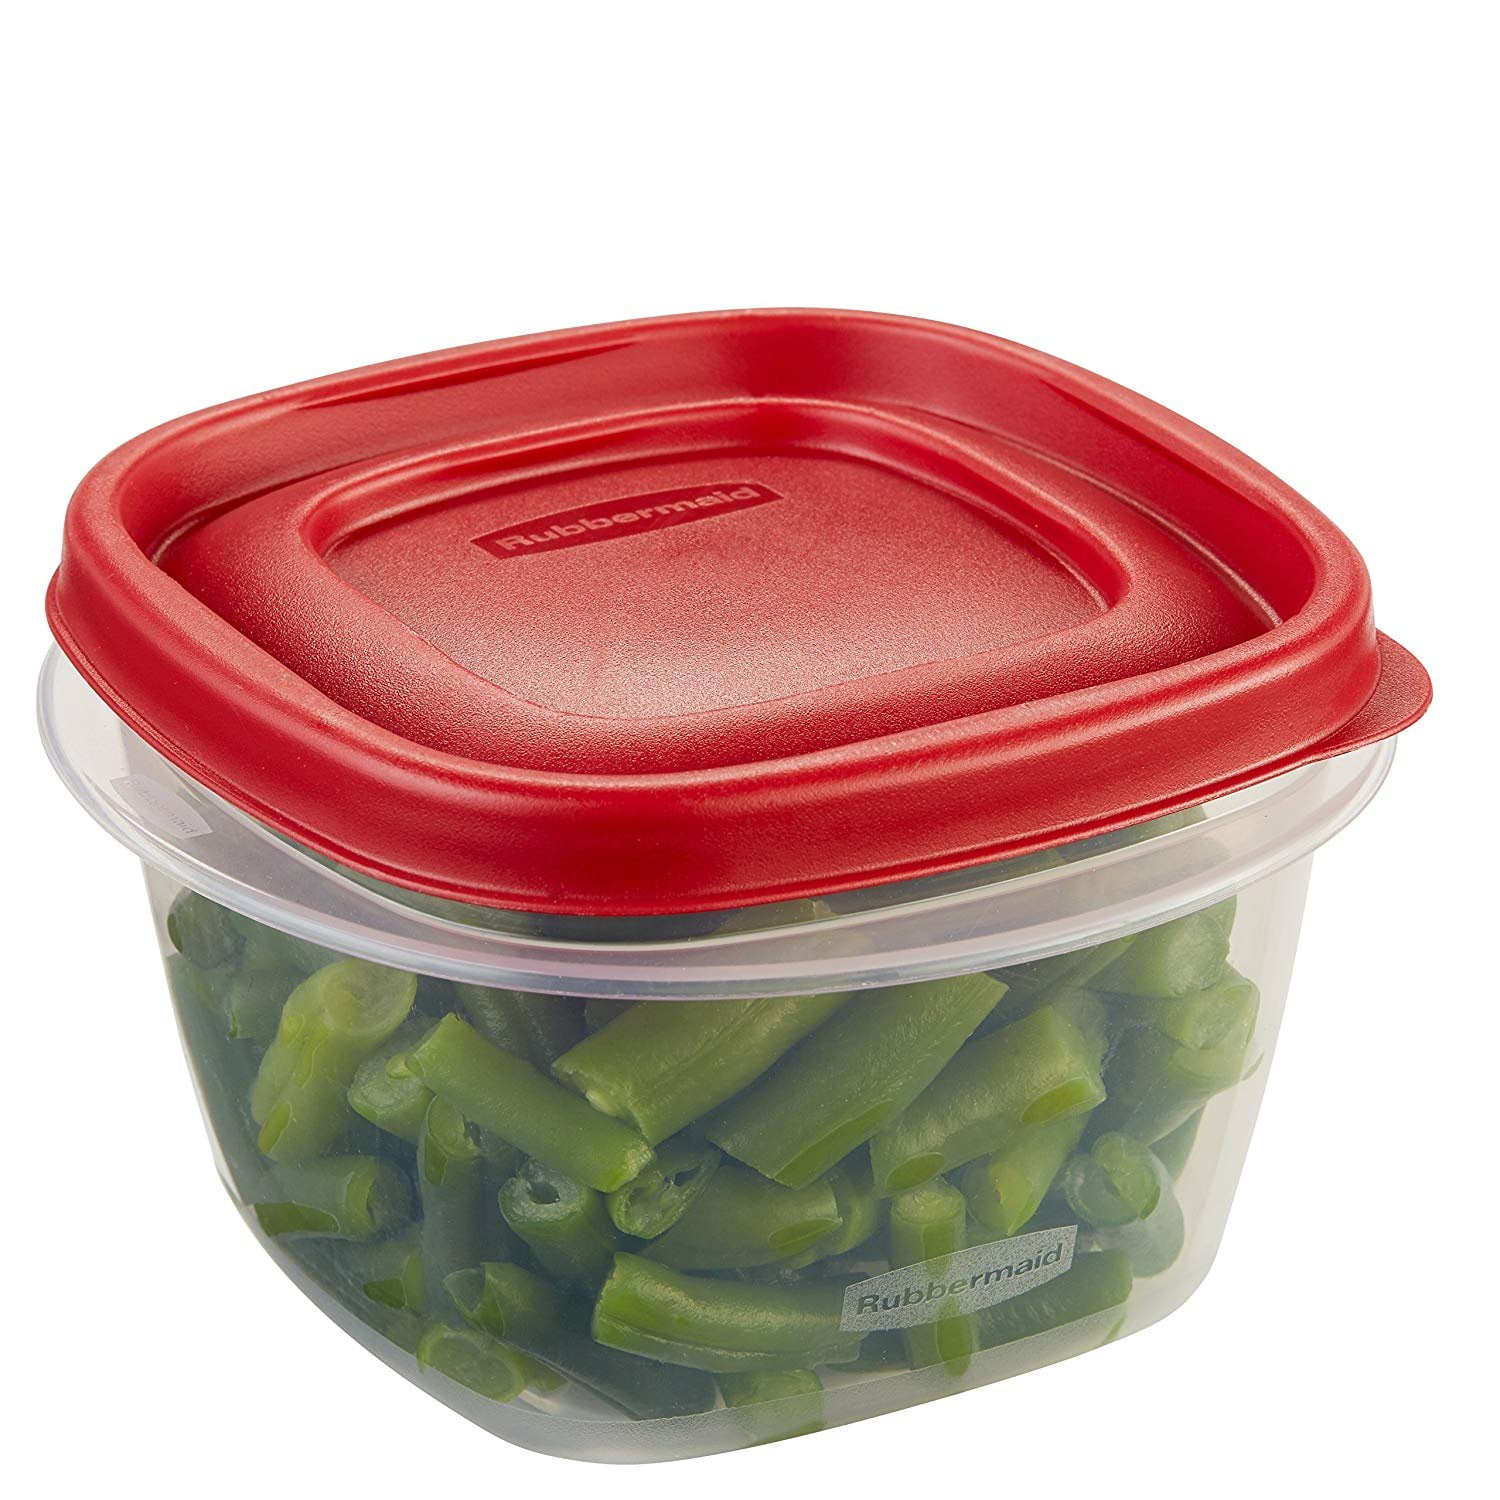  Rubbermaid 071691405382 food, 2 pack, clear with red lid: Food  Savers: Home & Kitchen